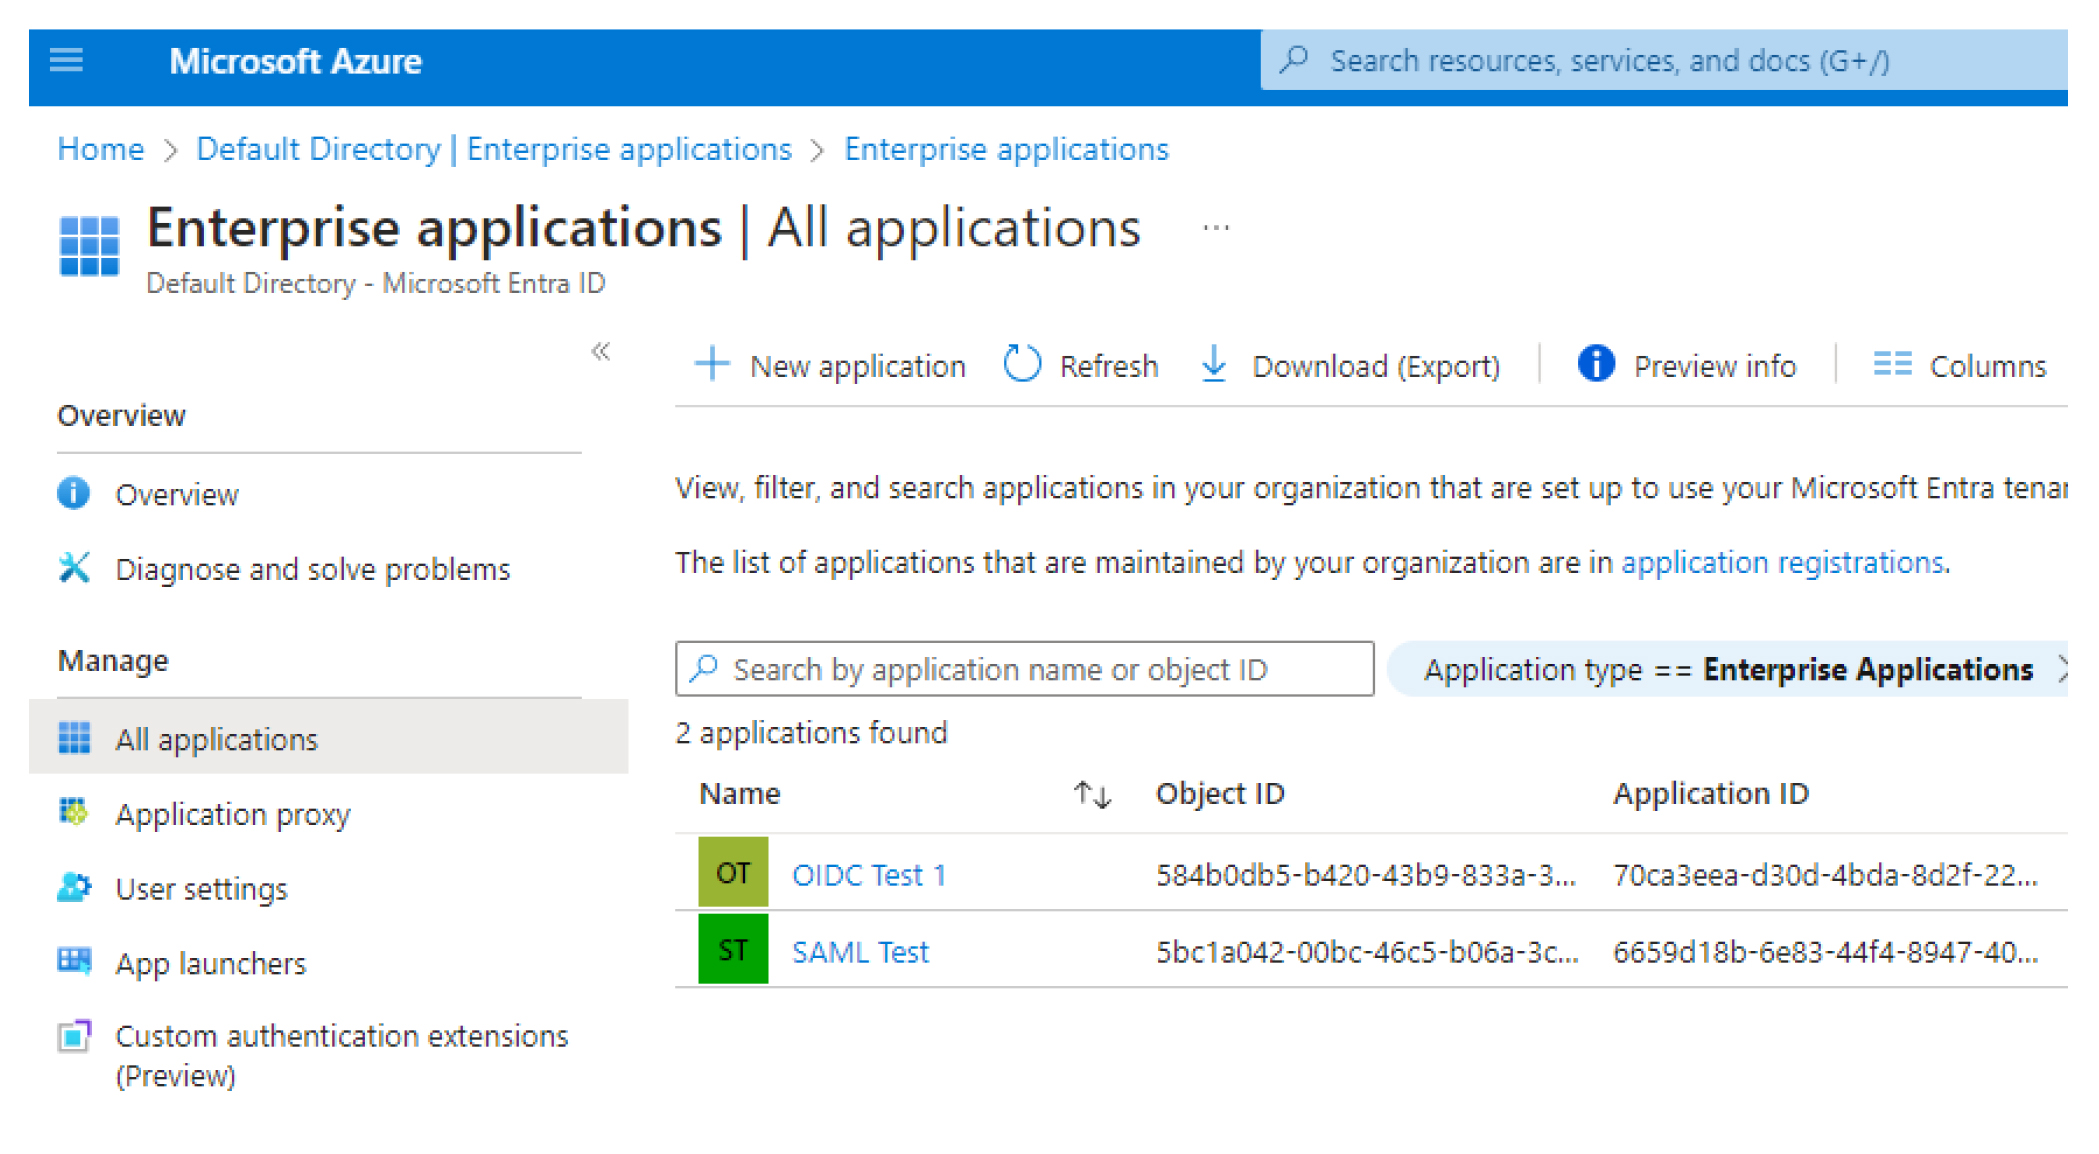 A screenshot showing the All applications page.